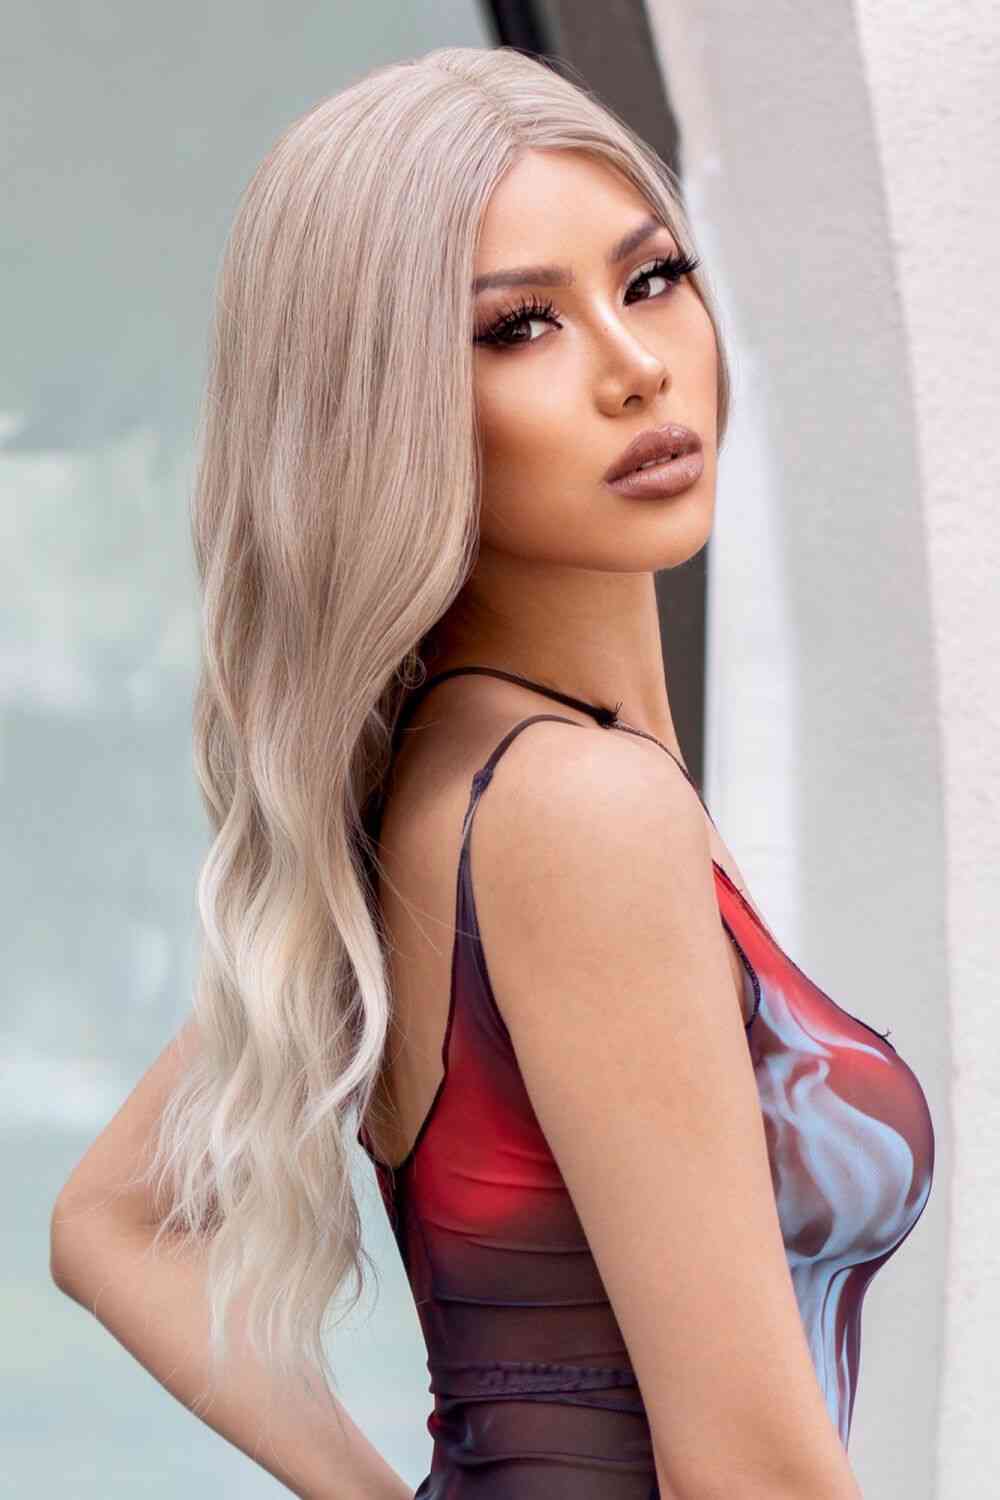 13*2" Lace Front Wigs Synthetic Long Wave 24" 150% Density in Medium Blonde Highlights - lolaluxeshop